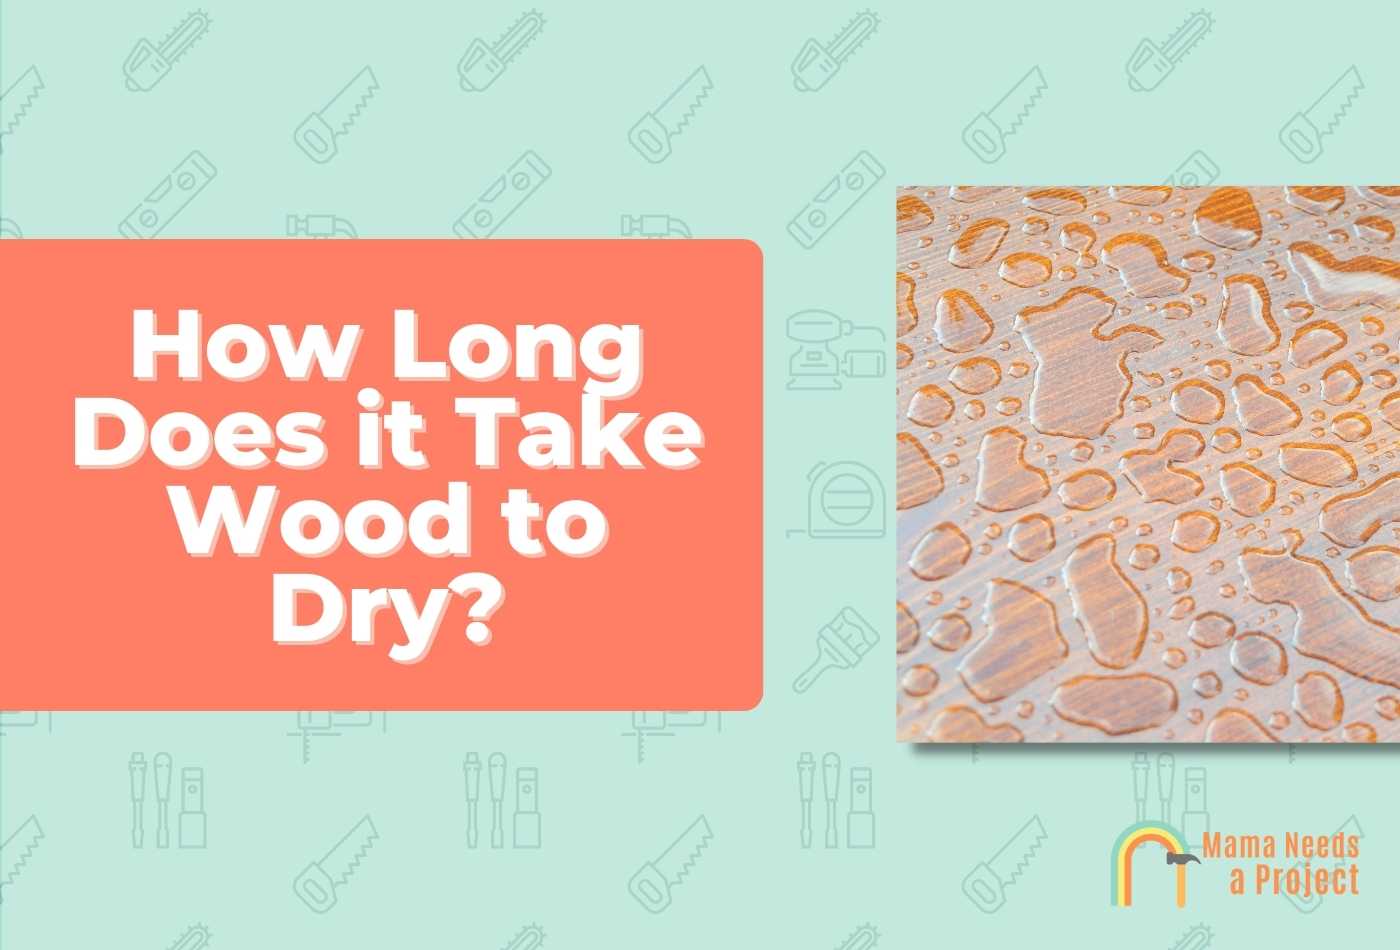 How Long Does it Take Wood to Dry